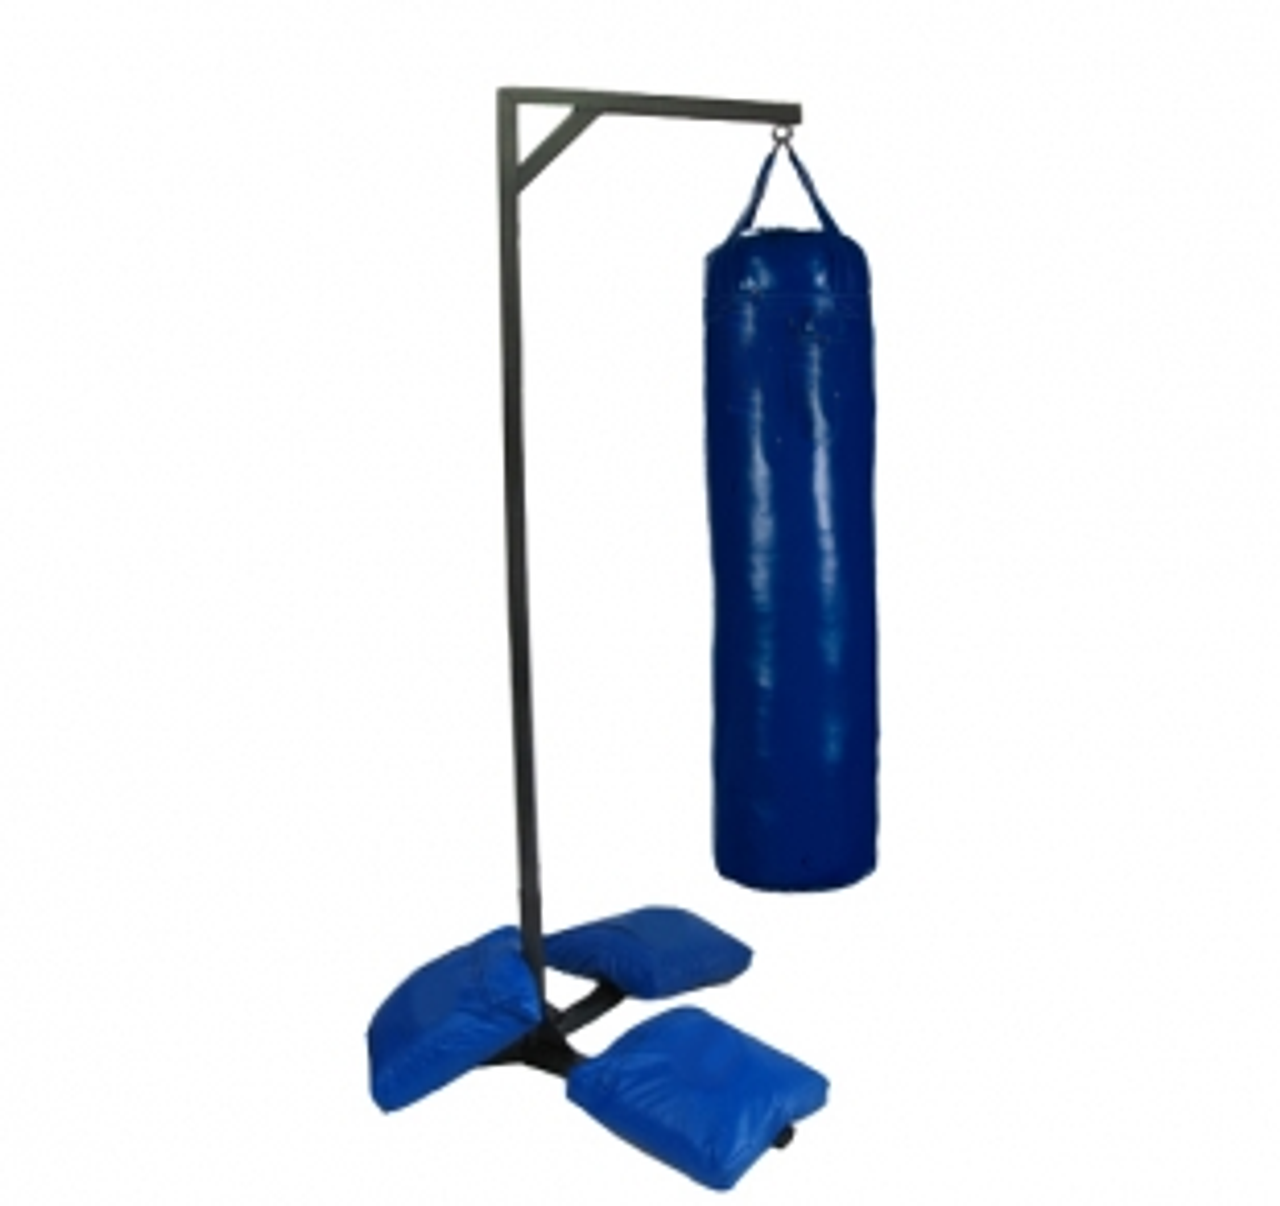 PROLAST Professional Heavy Bag Stand Small Size 